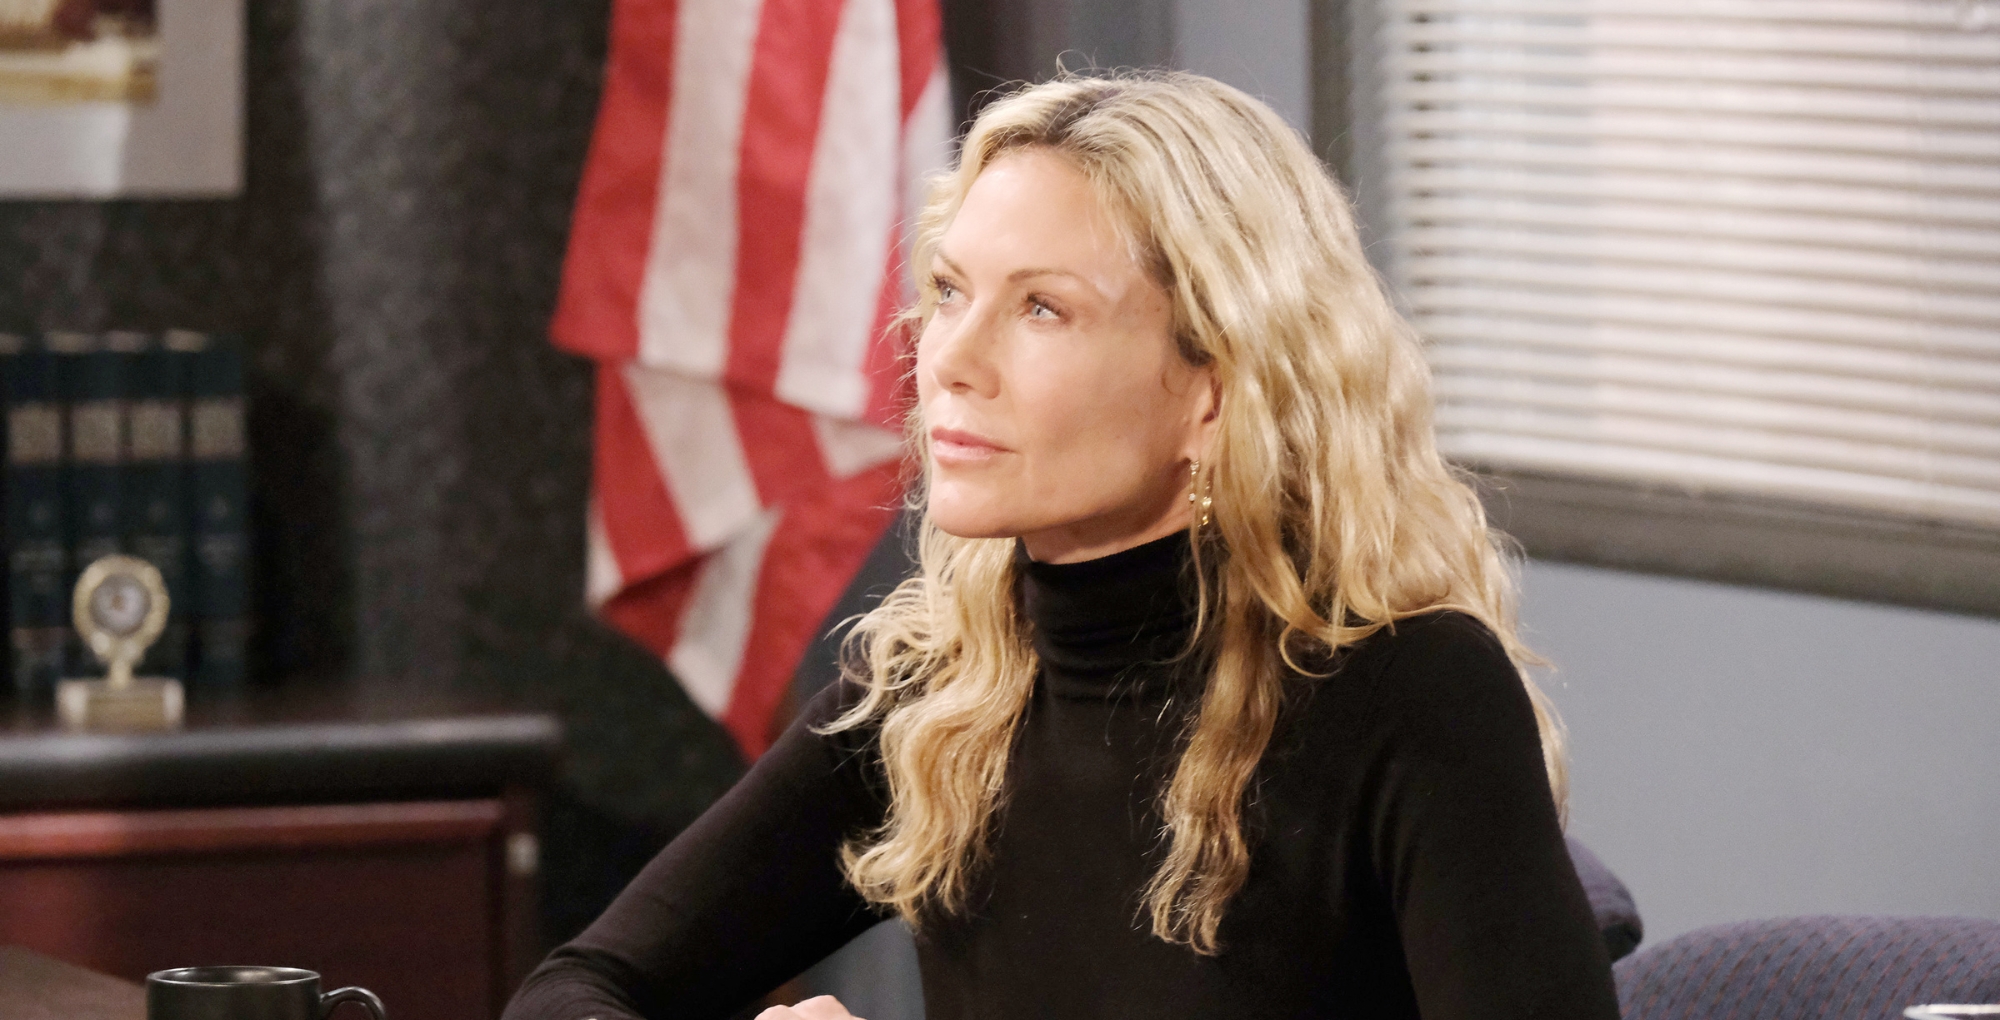 days of our lives spoilers show an arrested kristen dimera is in the holding area, wearing black